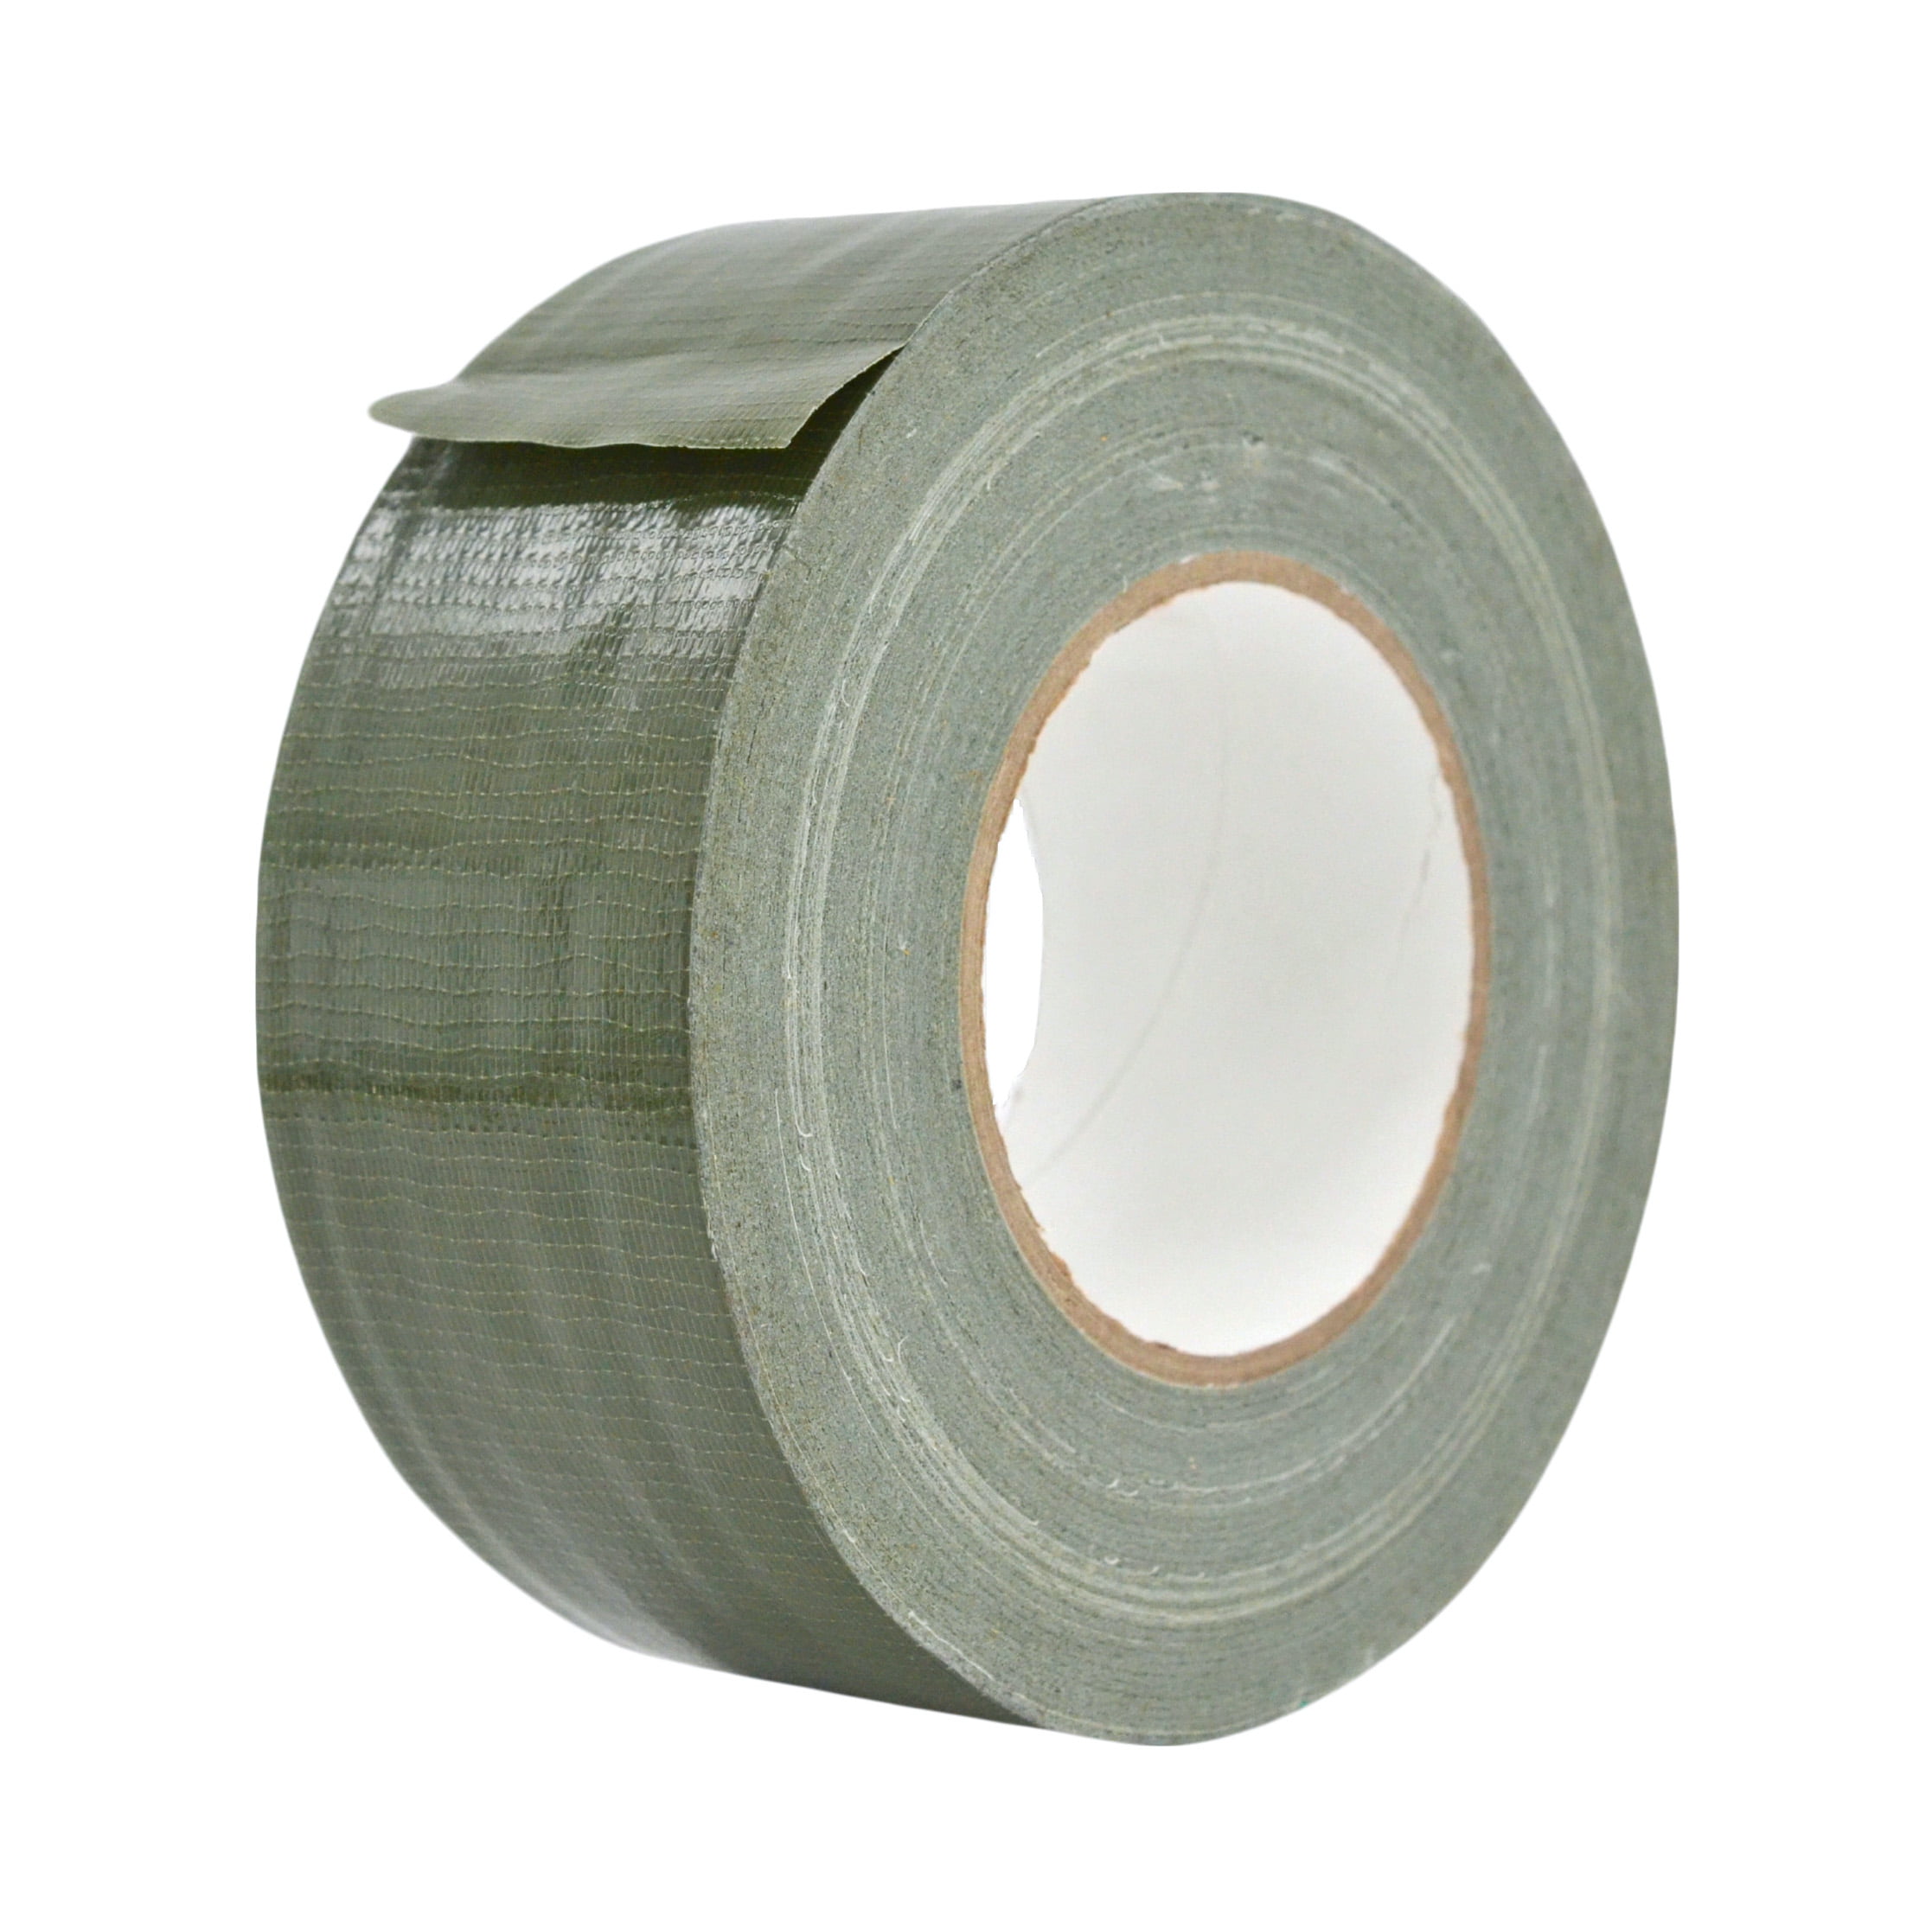 MAT Tape Light Green 2.36 in. x 60 yd. Colored Duct Tape, 1 Roll